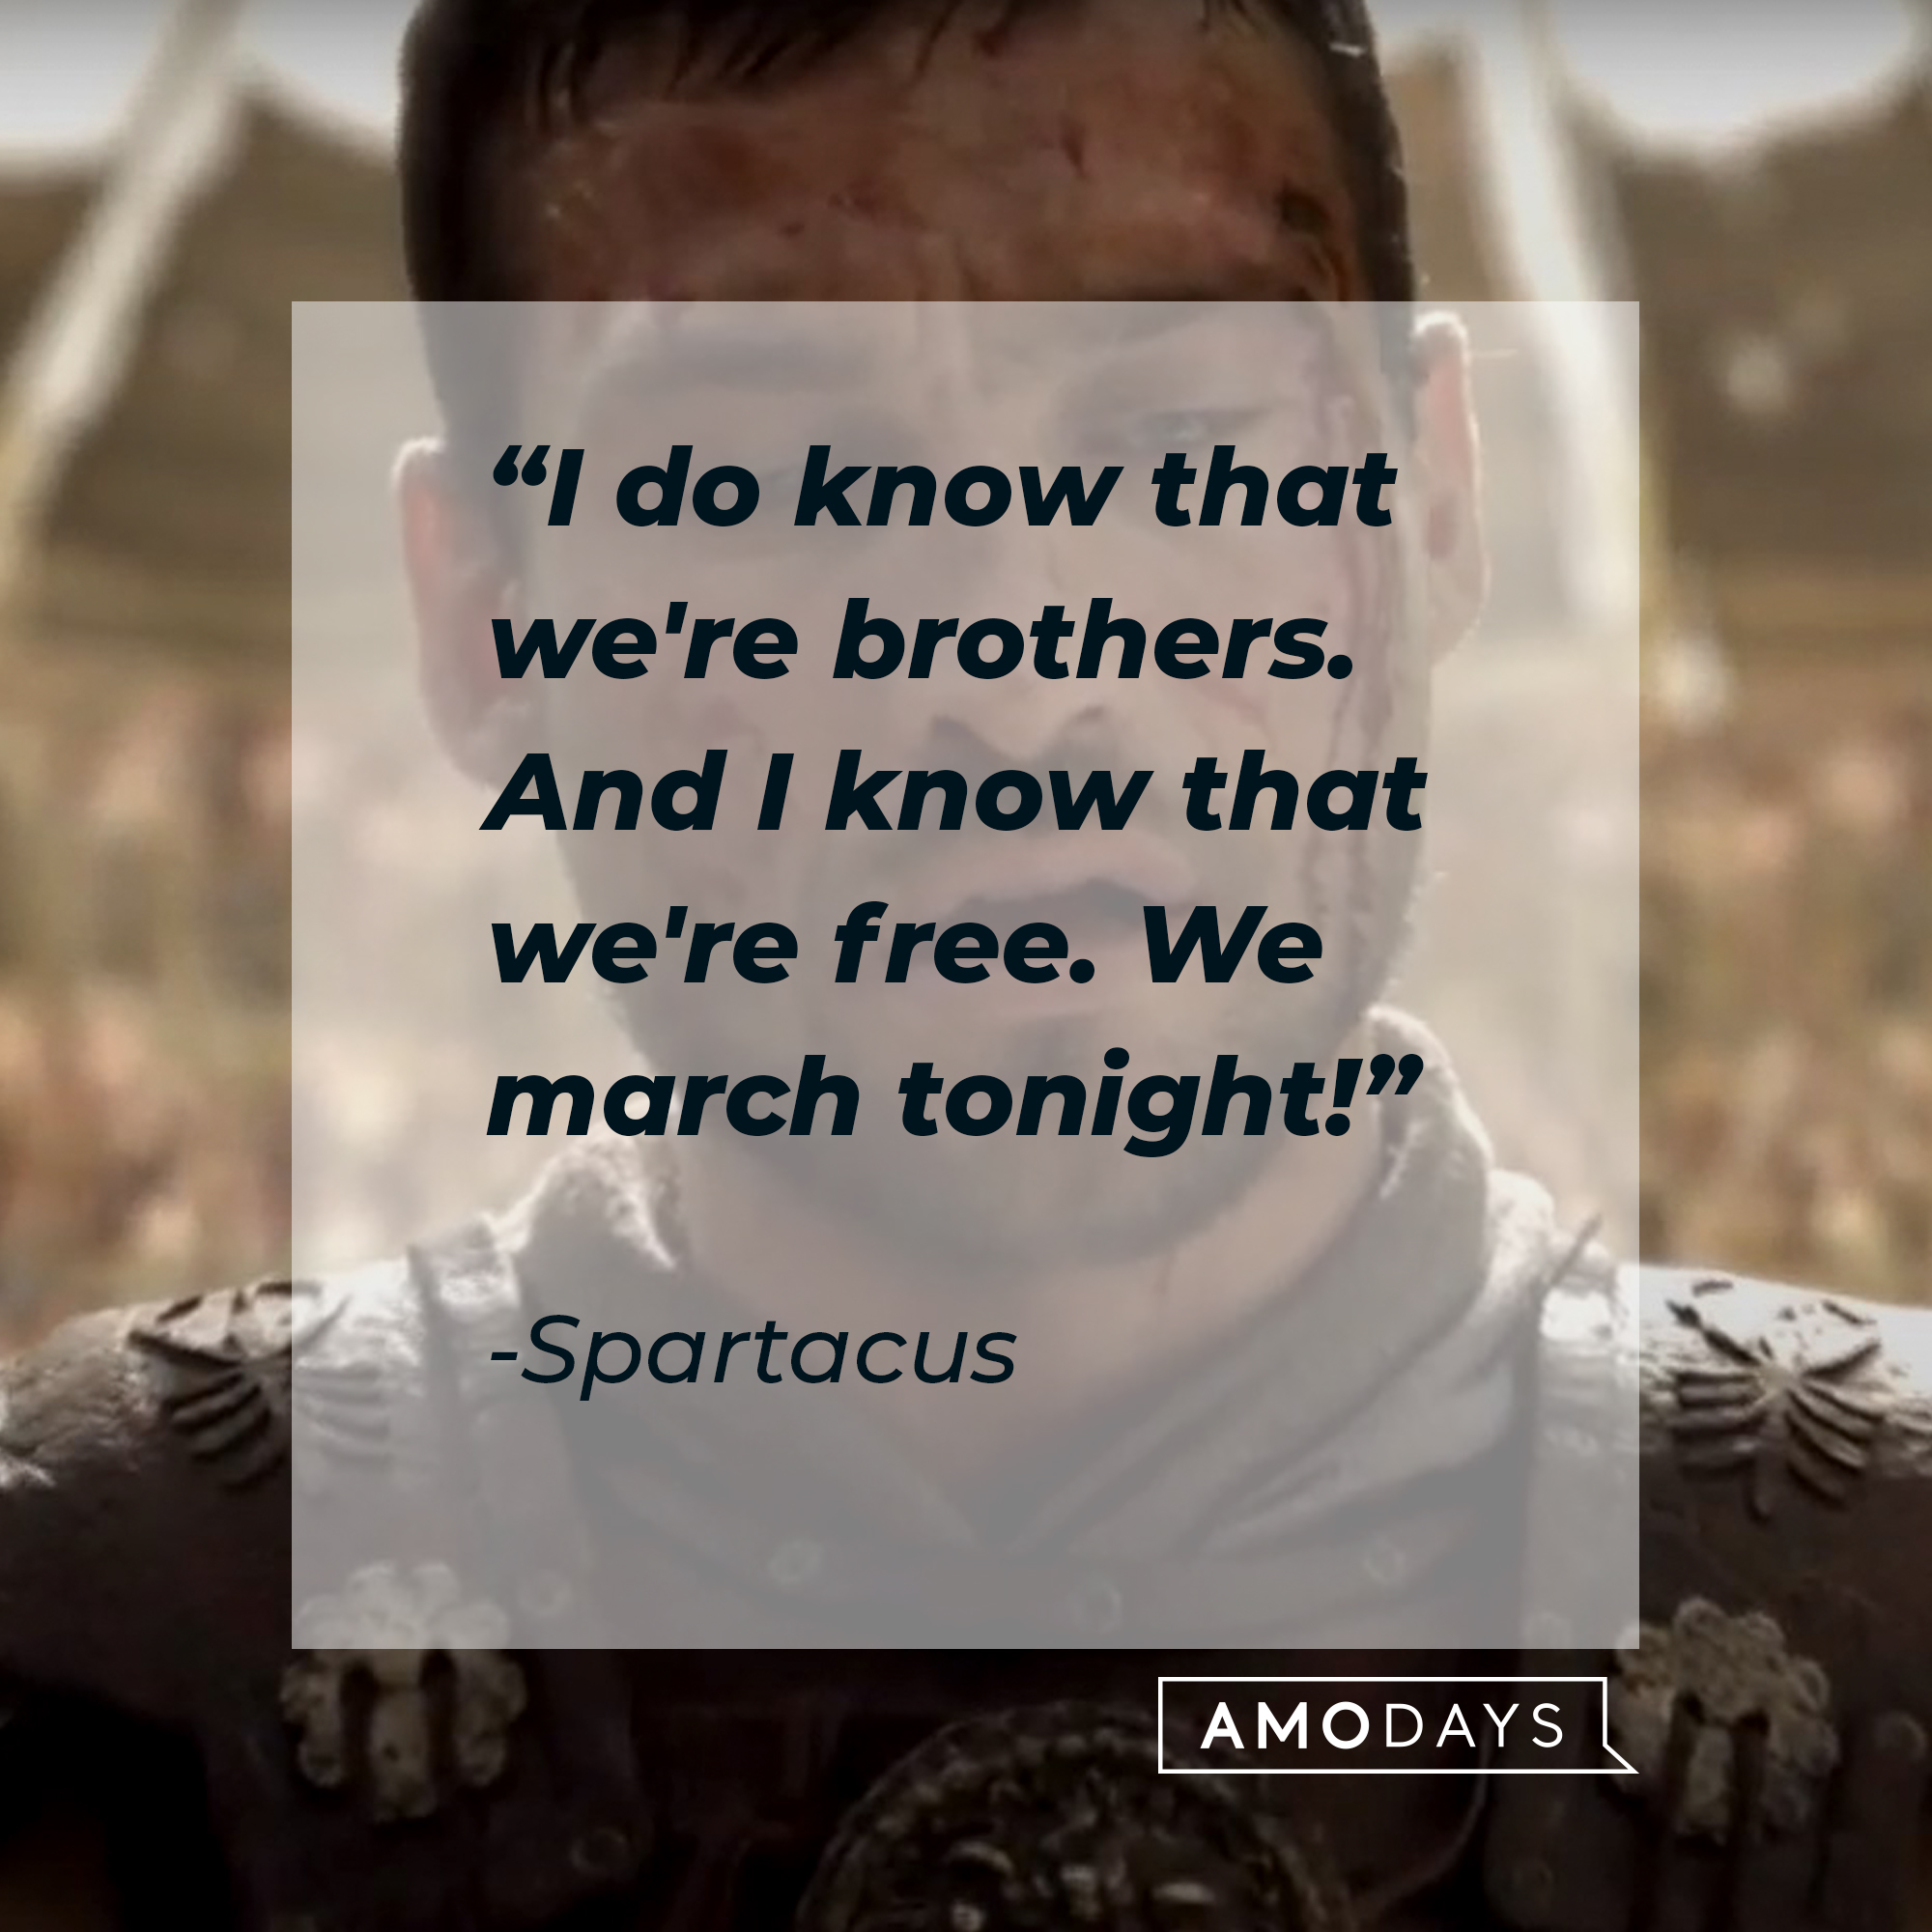 An image of the character Spartacus with his quote: “I do know that we're brothers. And I know that we're free. We march tonight!”|  Source: youtube.com/Starz